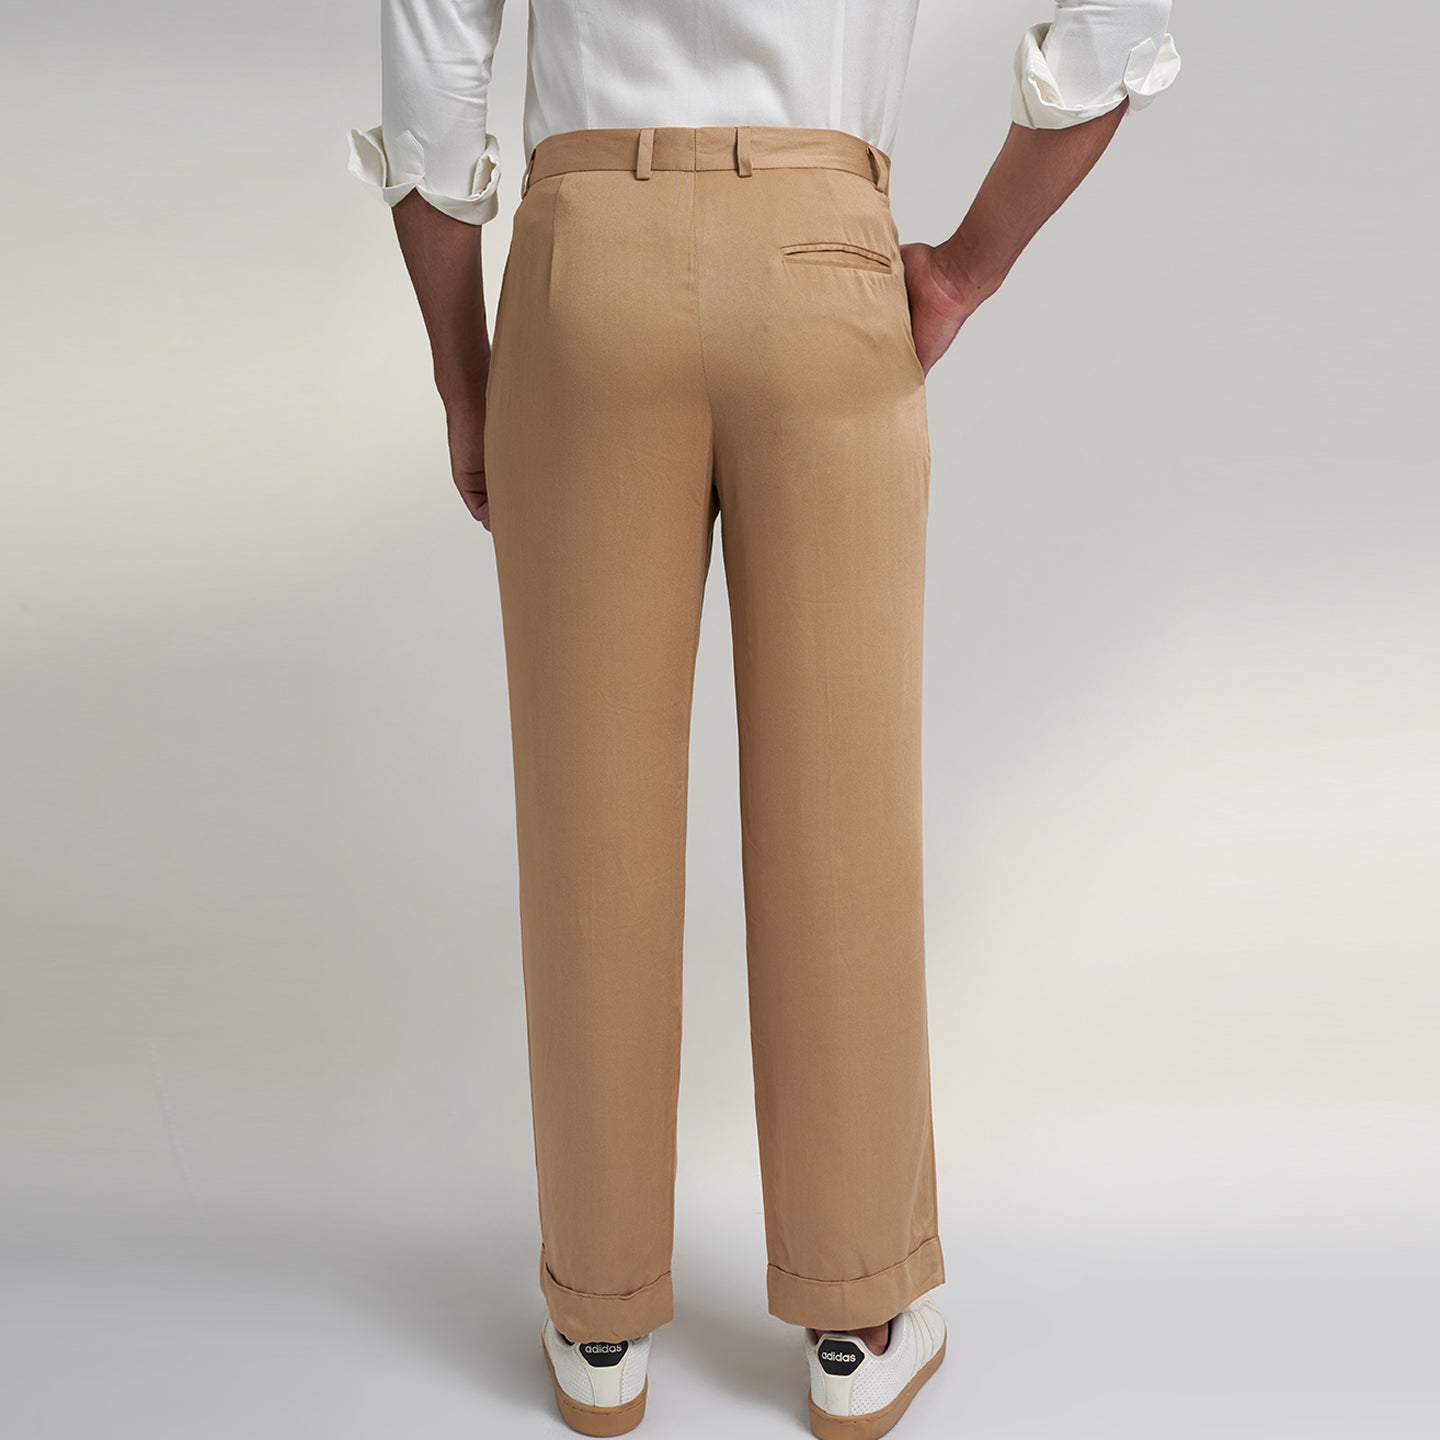 a medium size model wearing beige color trouser made from organic lotus silk fabric. the pant is a basic straight fit with 2 pleats and turn up bottom. 